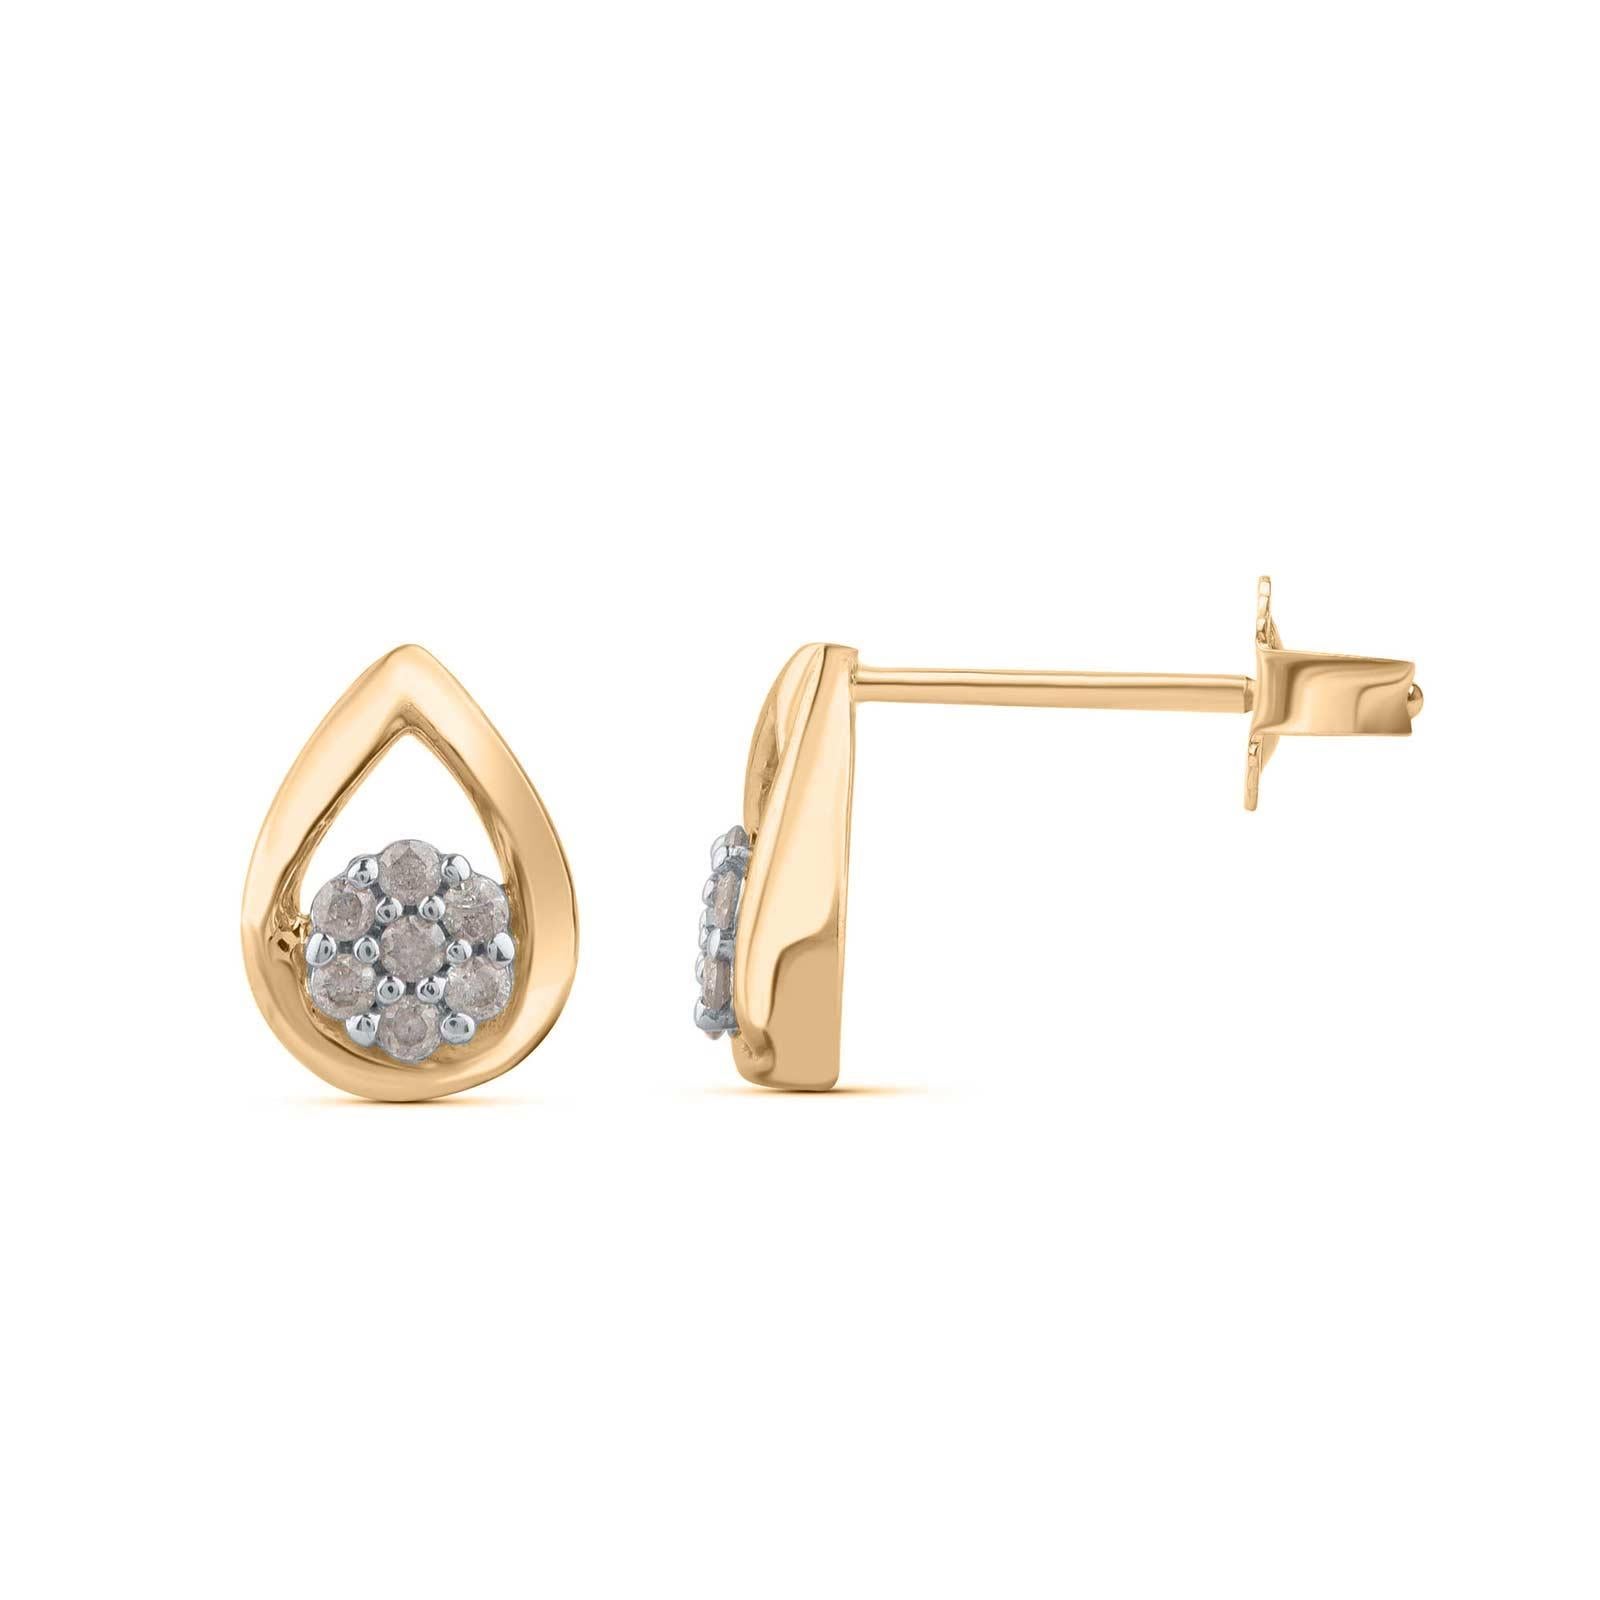 A glammed up look, perfect for a night on the town, these teardrop stud earrings are certain to delight. Expertly crafted in 14K yellow Gold, earring is cleverly filled with 14 brilliant cut diamond set in prong setting and shimmers in H-I color I2